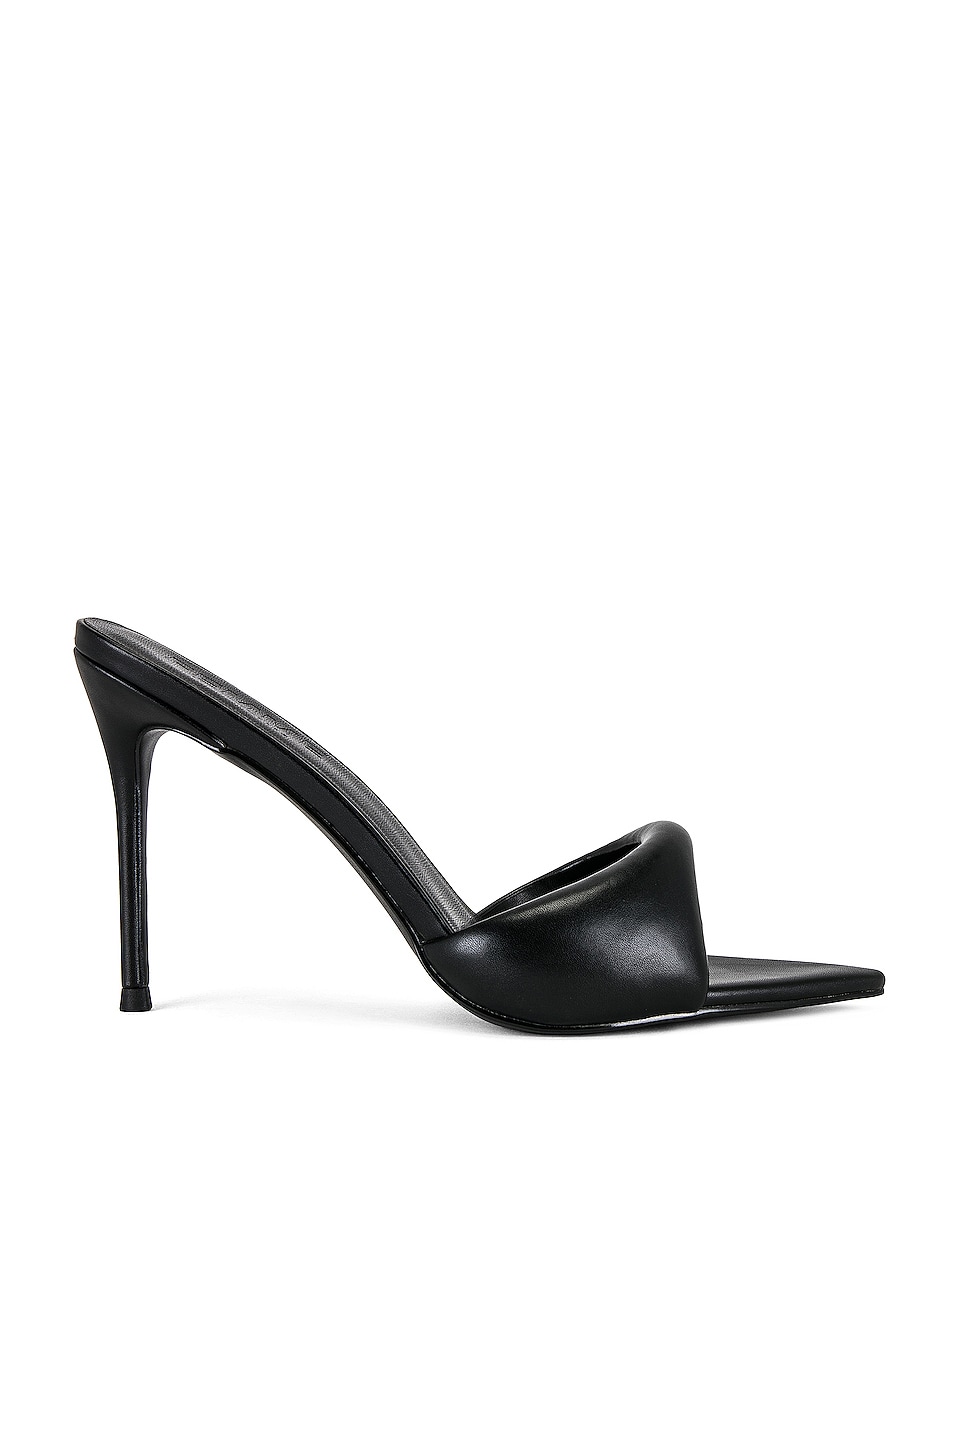 BLACK HEELED MULES: There are so many designer and high-street fashion brands with new heeled mules designs popping up all the time, but you actually don't have to go anywhere searching, because I have curated for you the hottest designs for this summer for all budgets. Come and see them. :)